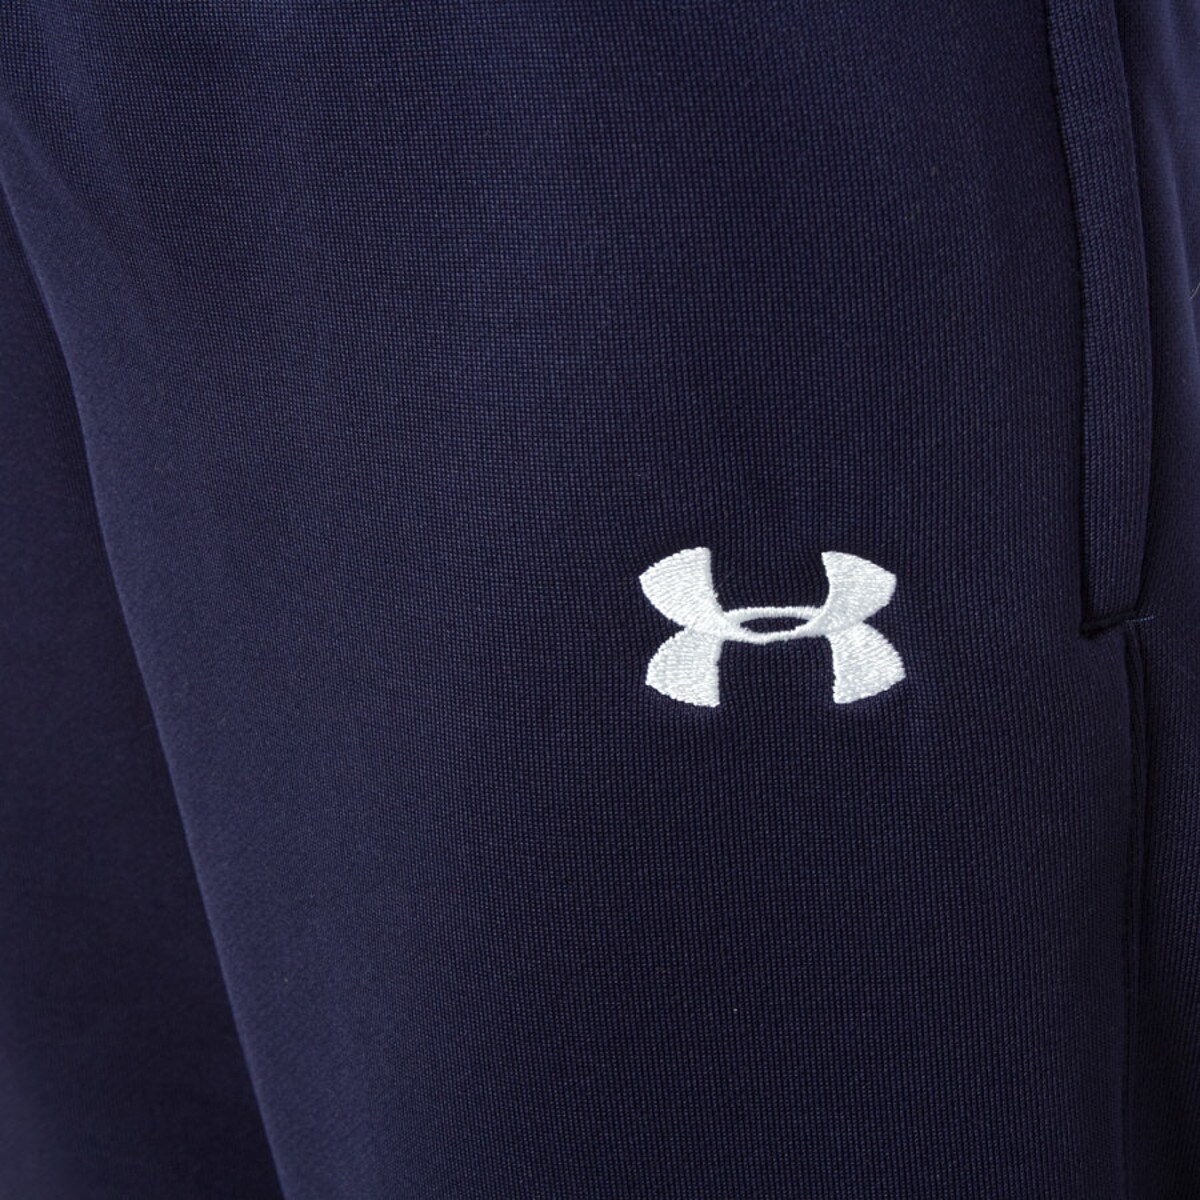 Under Armour Classic Warm-Up Pant - Boys' - Kids